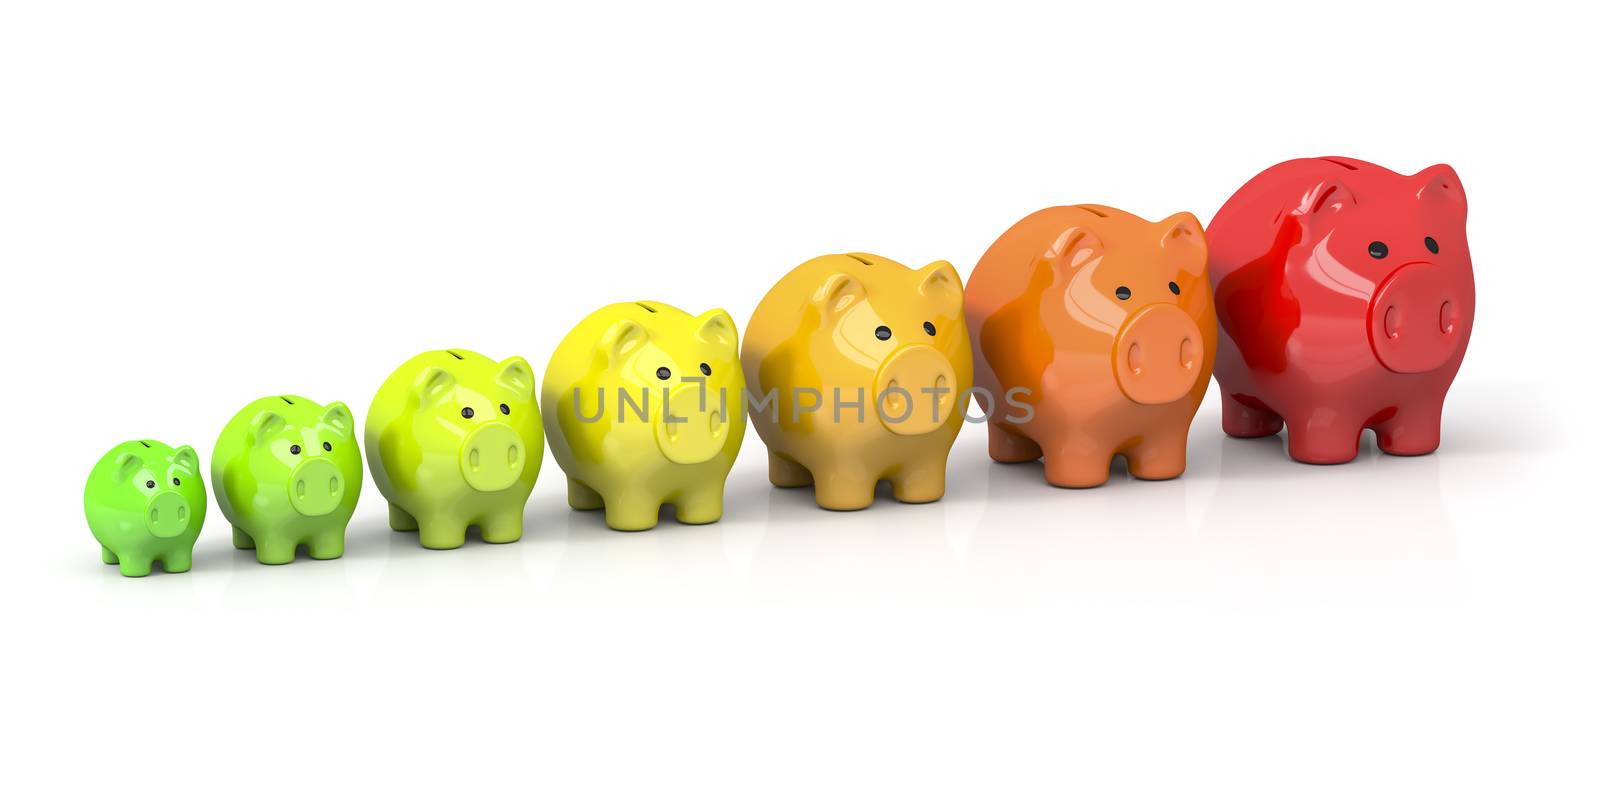 3d rendering of some piggy banks in different colors for energy efficiency